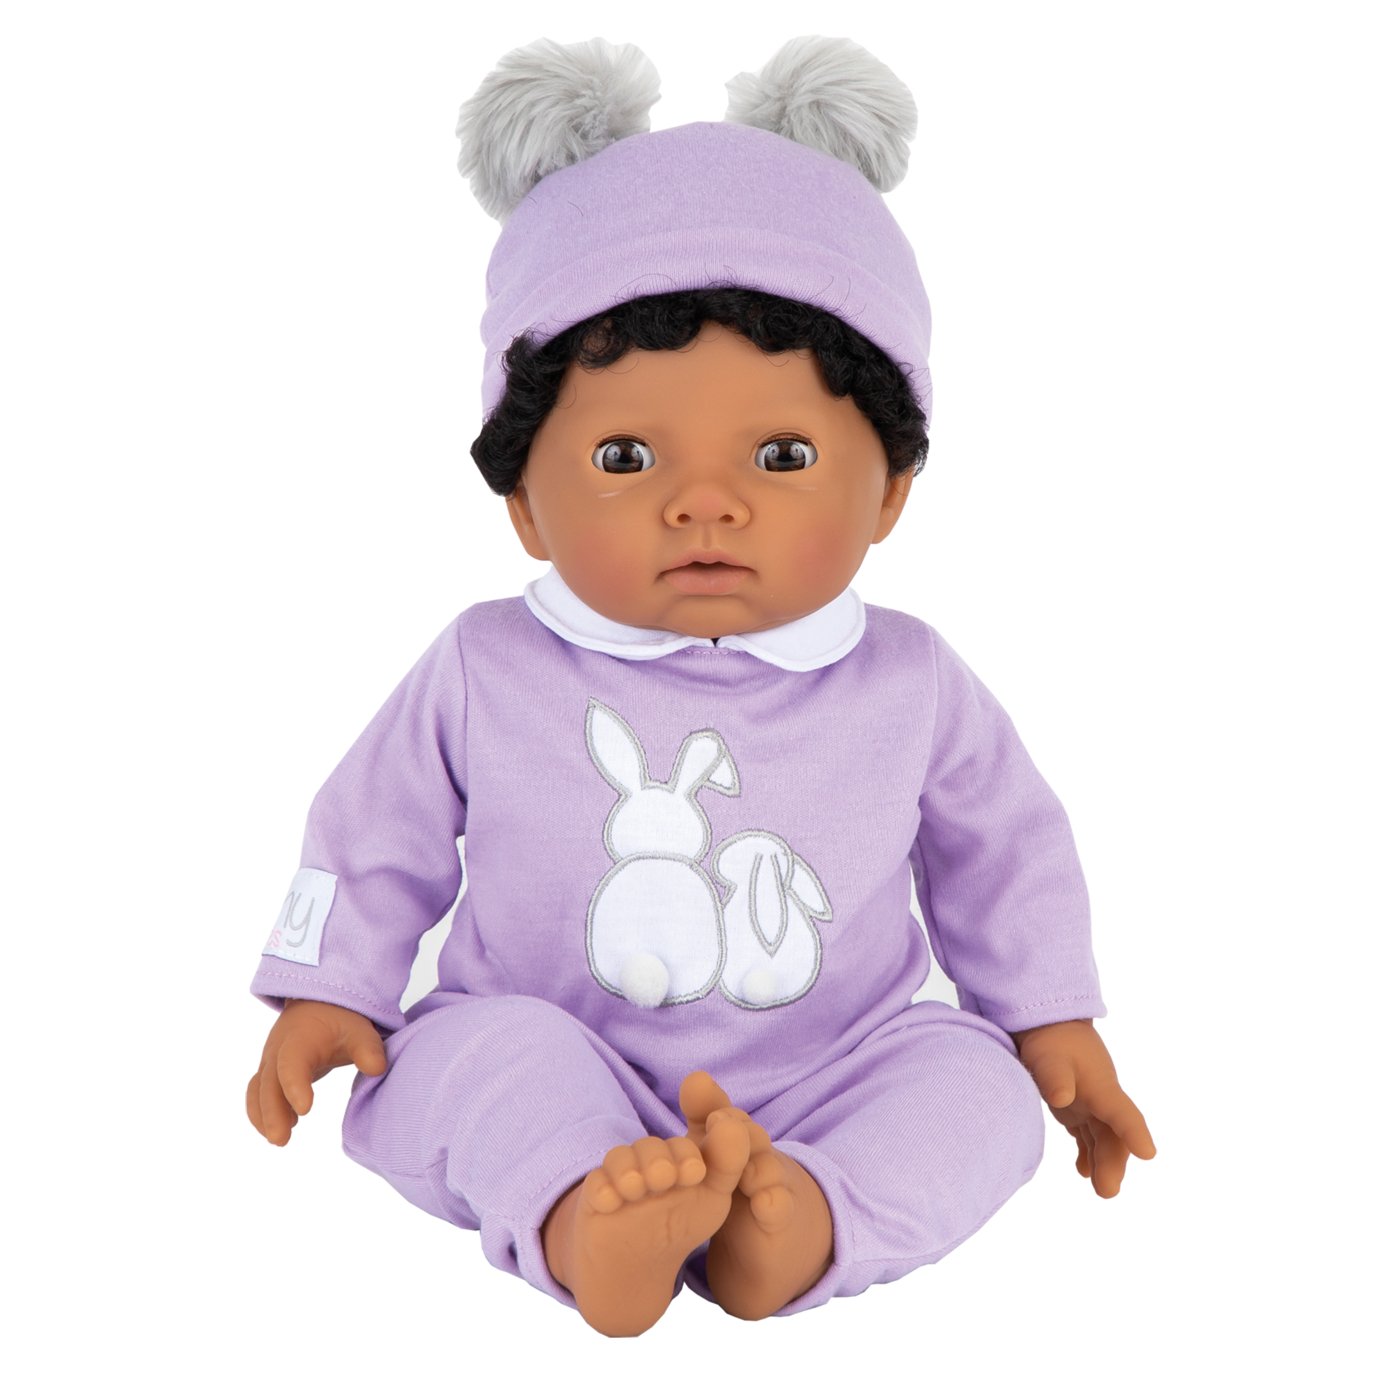 Tiny Treasures Doll with Purple Outfit 